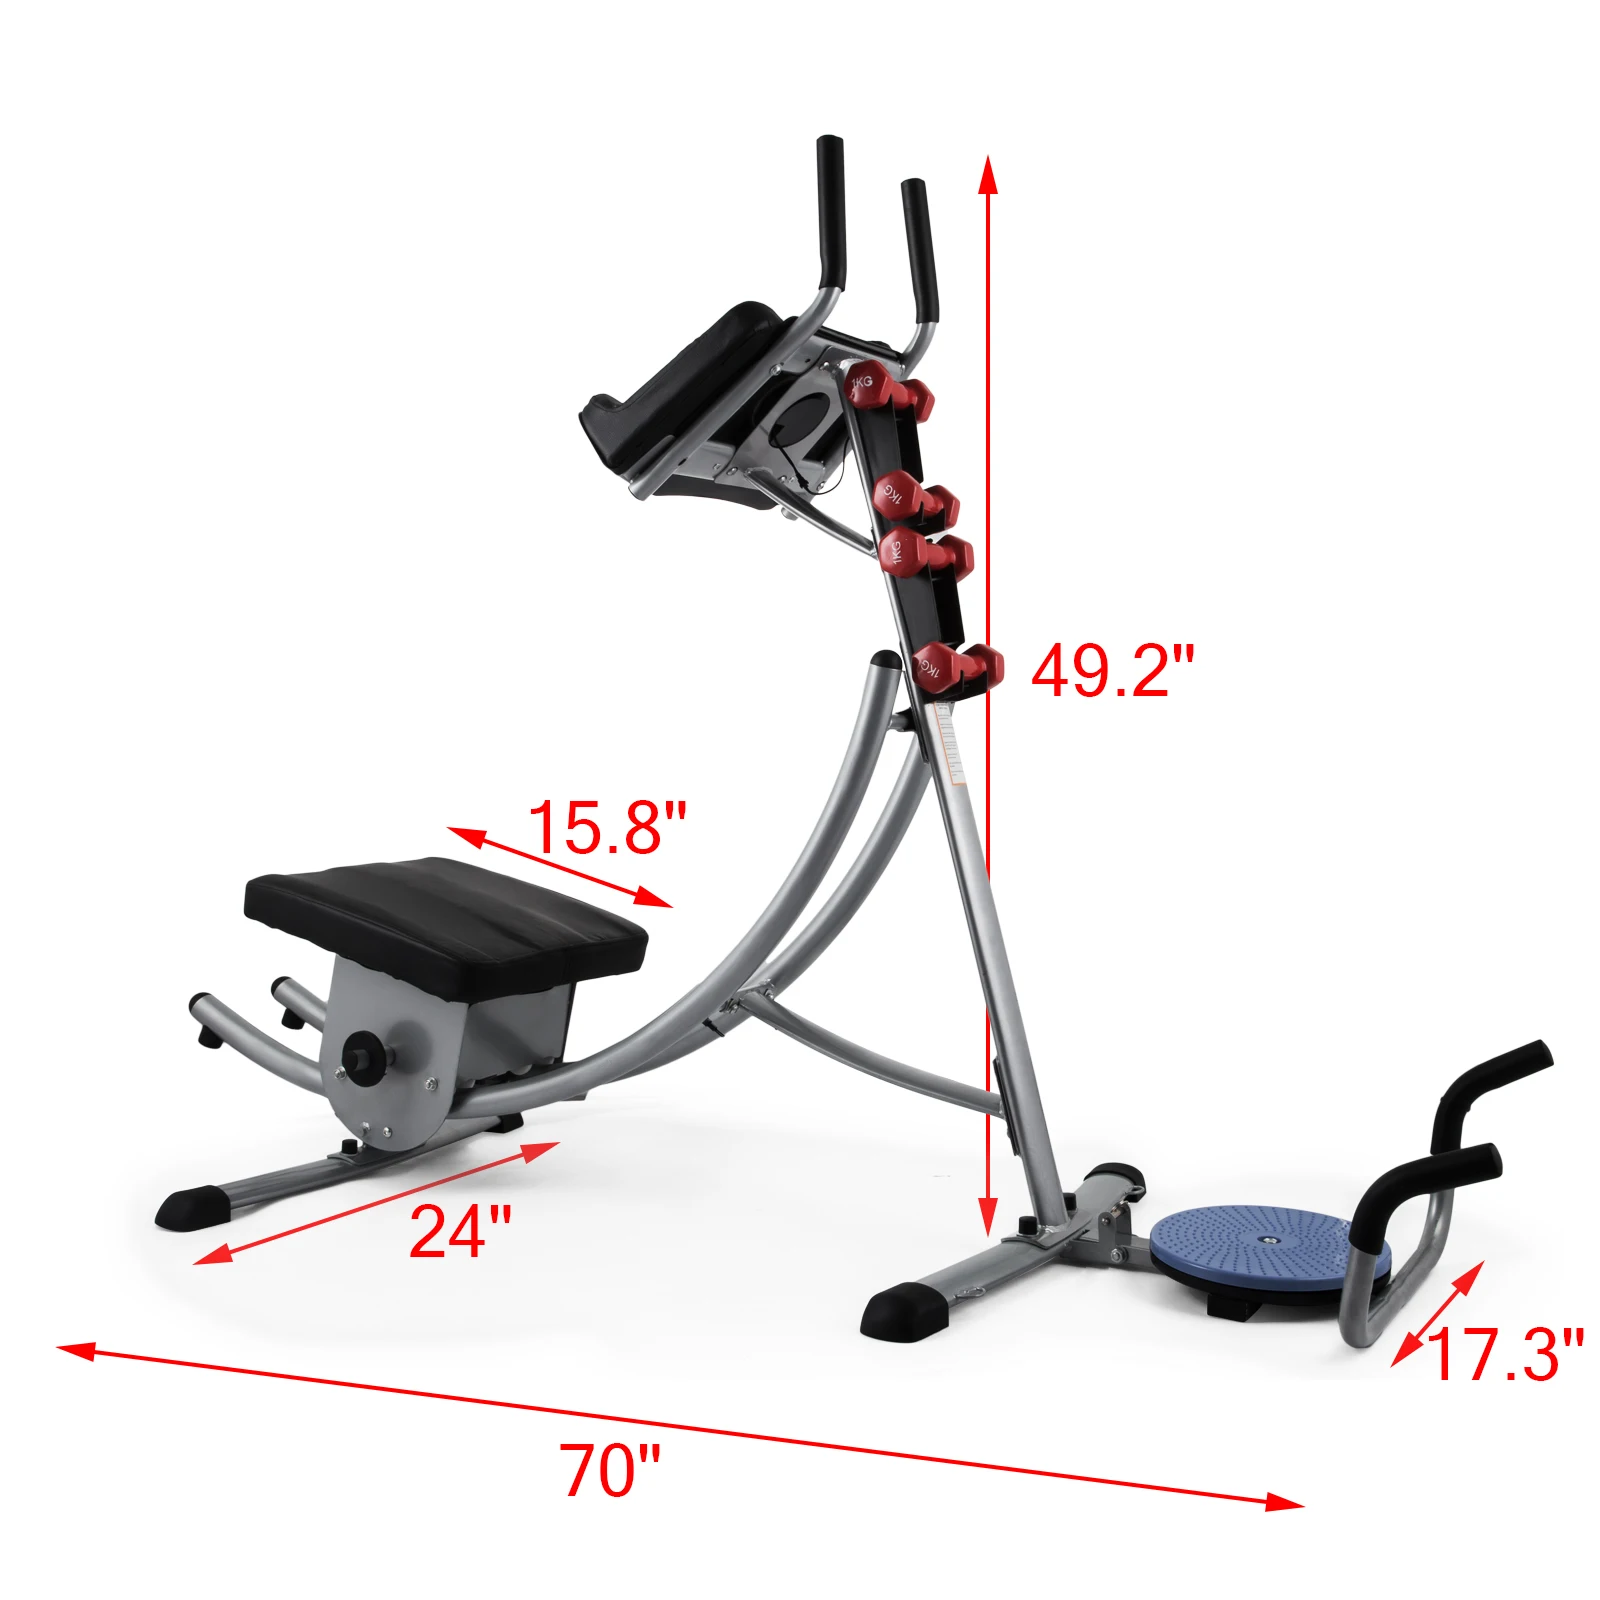 

Commercial fitness gym equipment abdominal trainer AB coaster machine